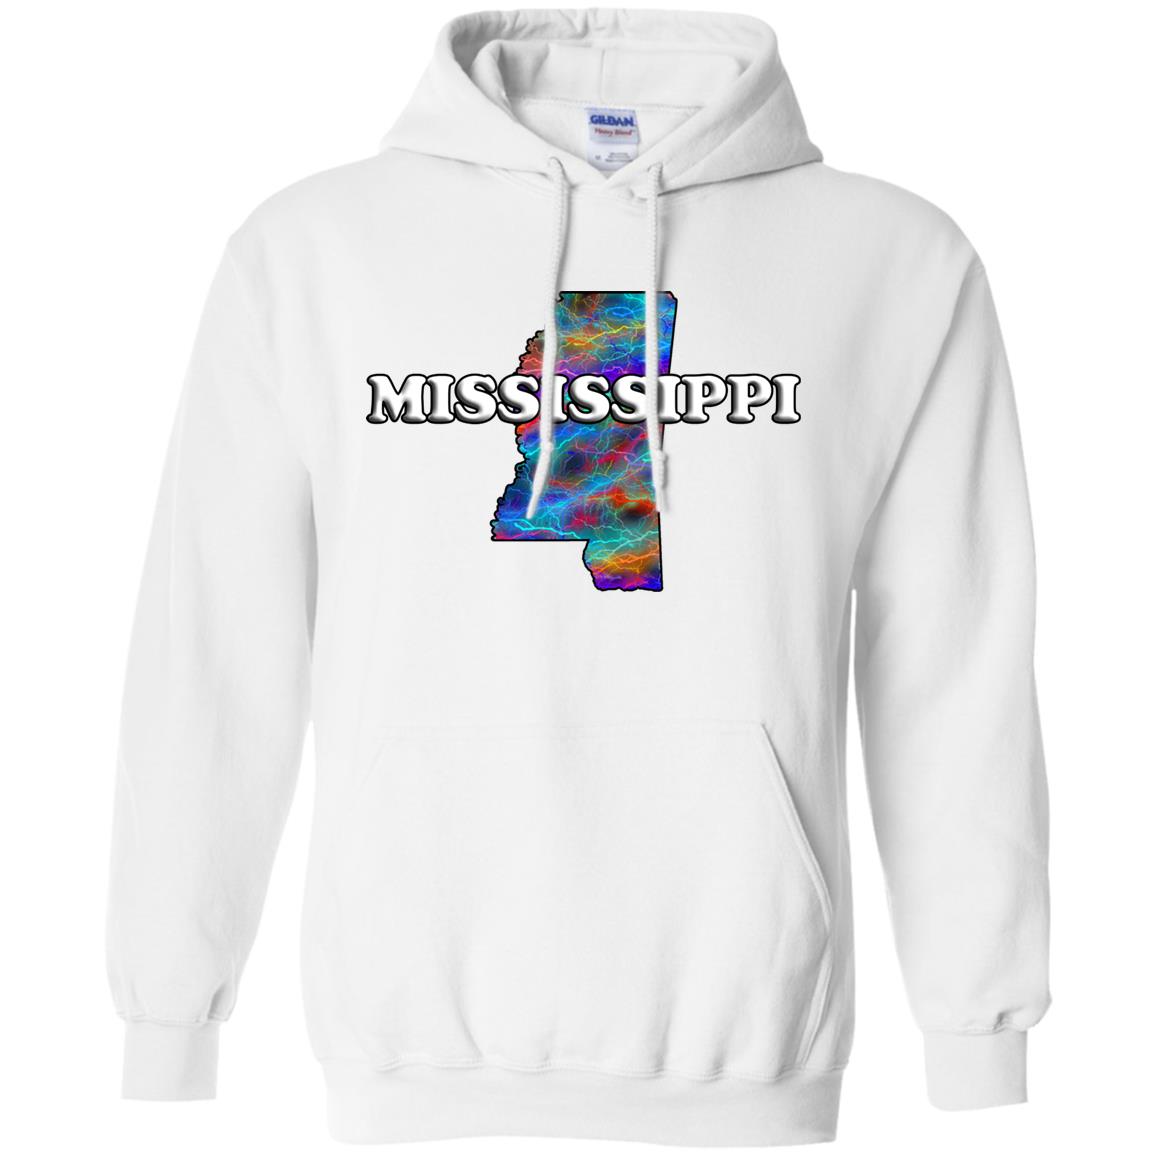 MISSISSIPPI STATE HOODIE | KC WOW WARES